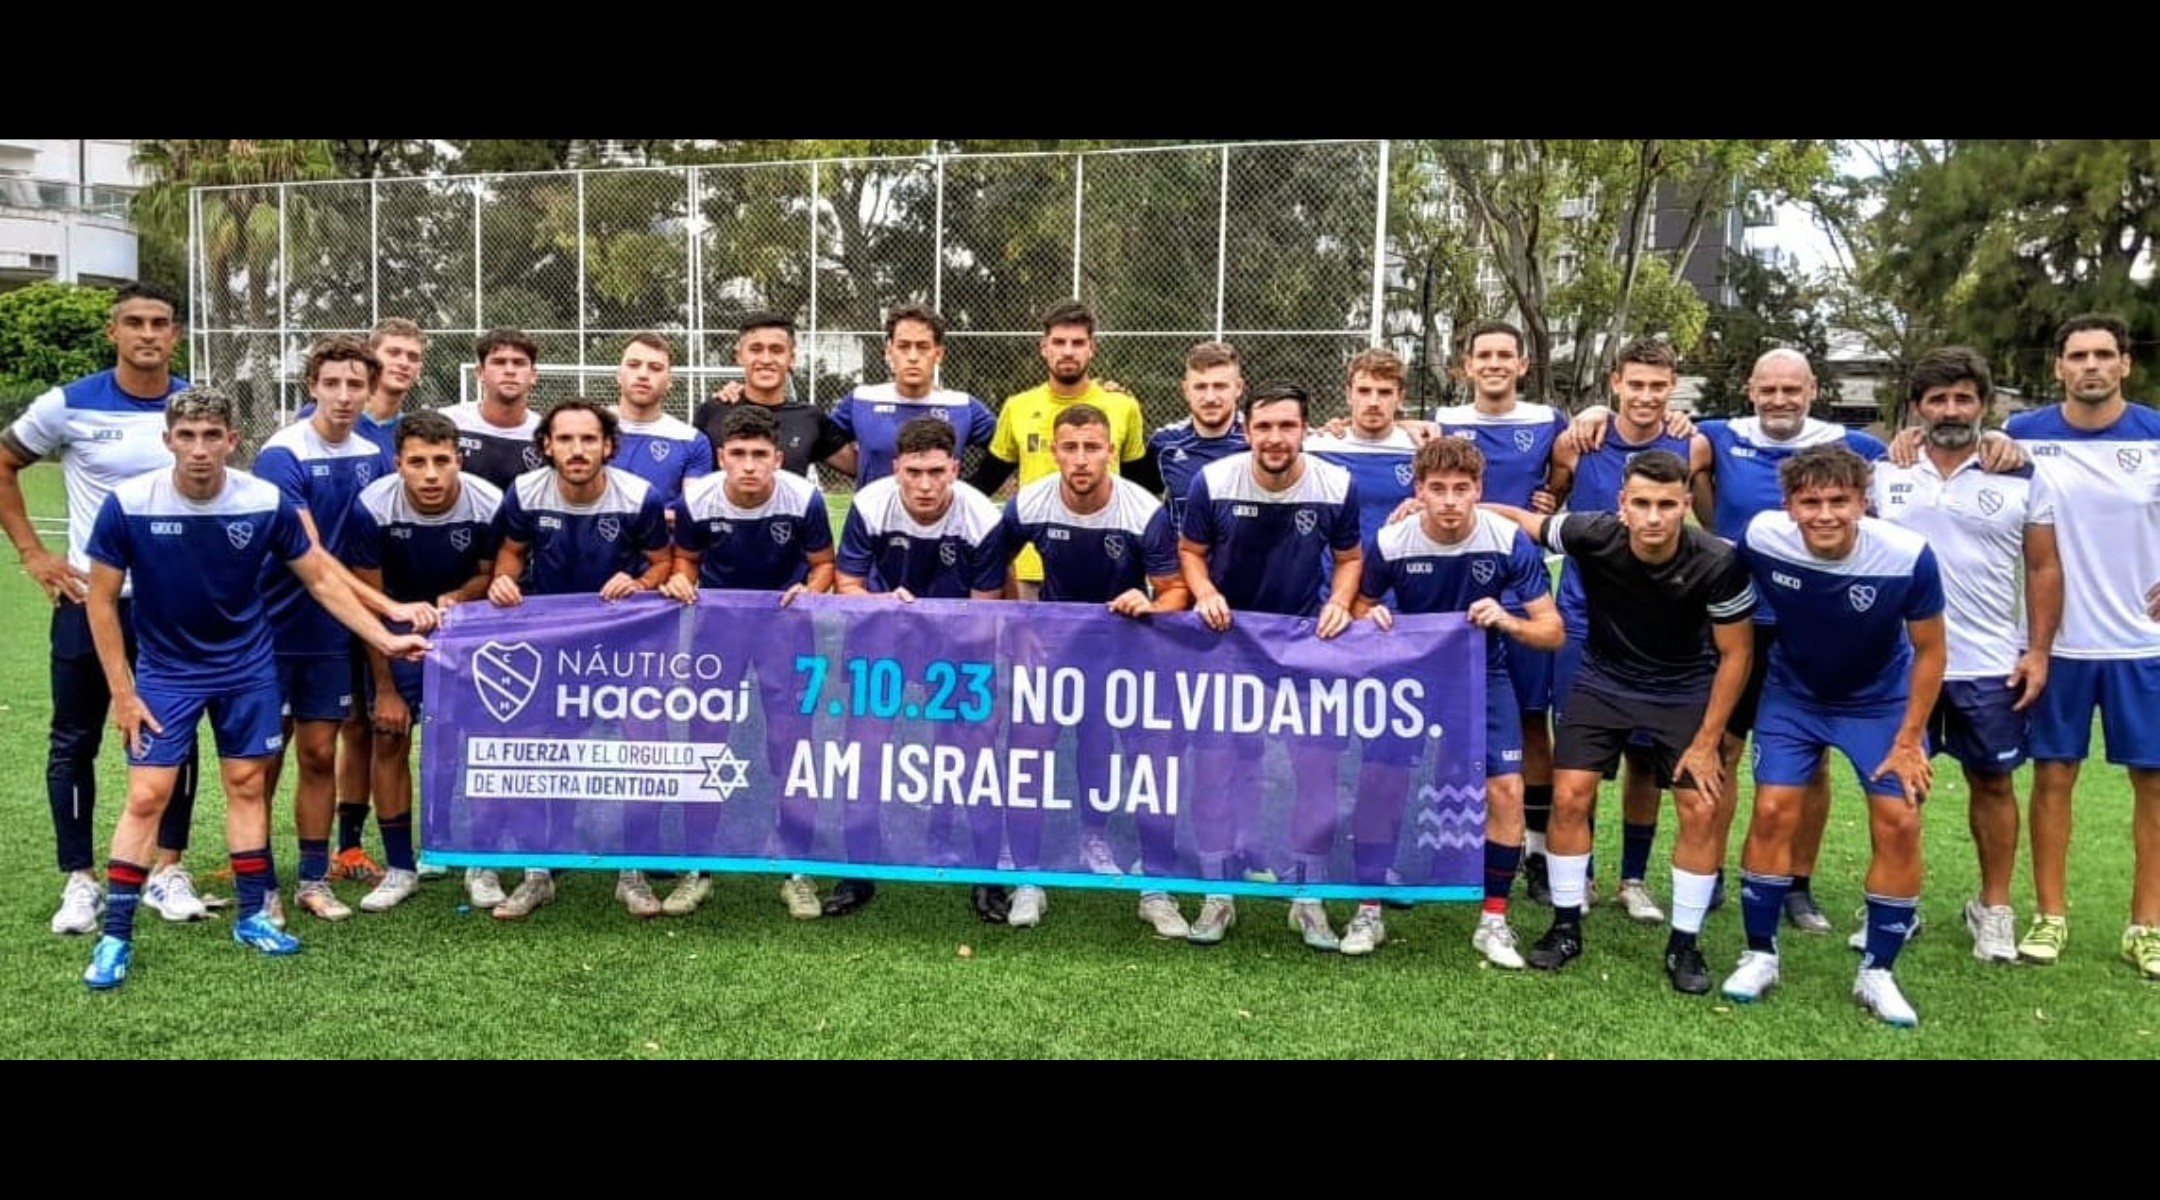 The Jewish Sport Report: This Jewish club is breaking a nearly 60-year drought in Argentine football